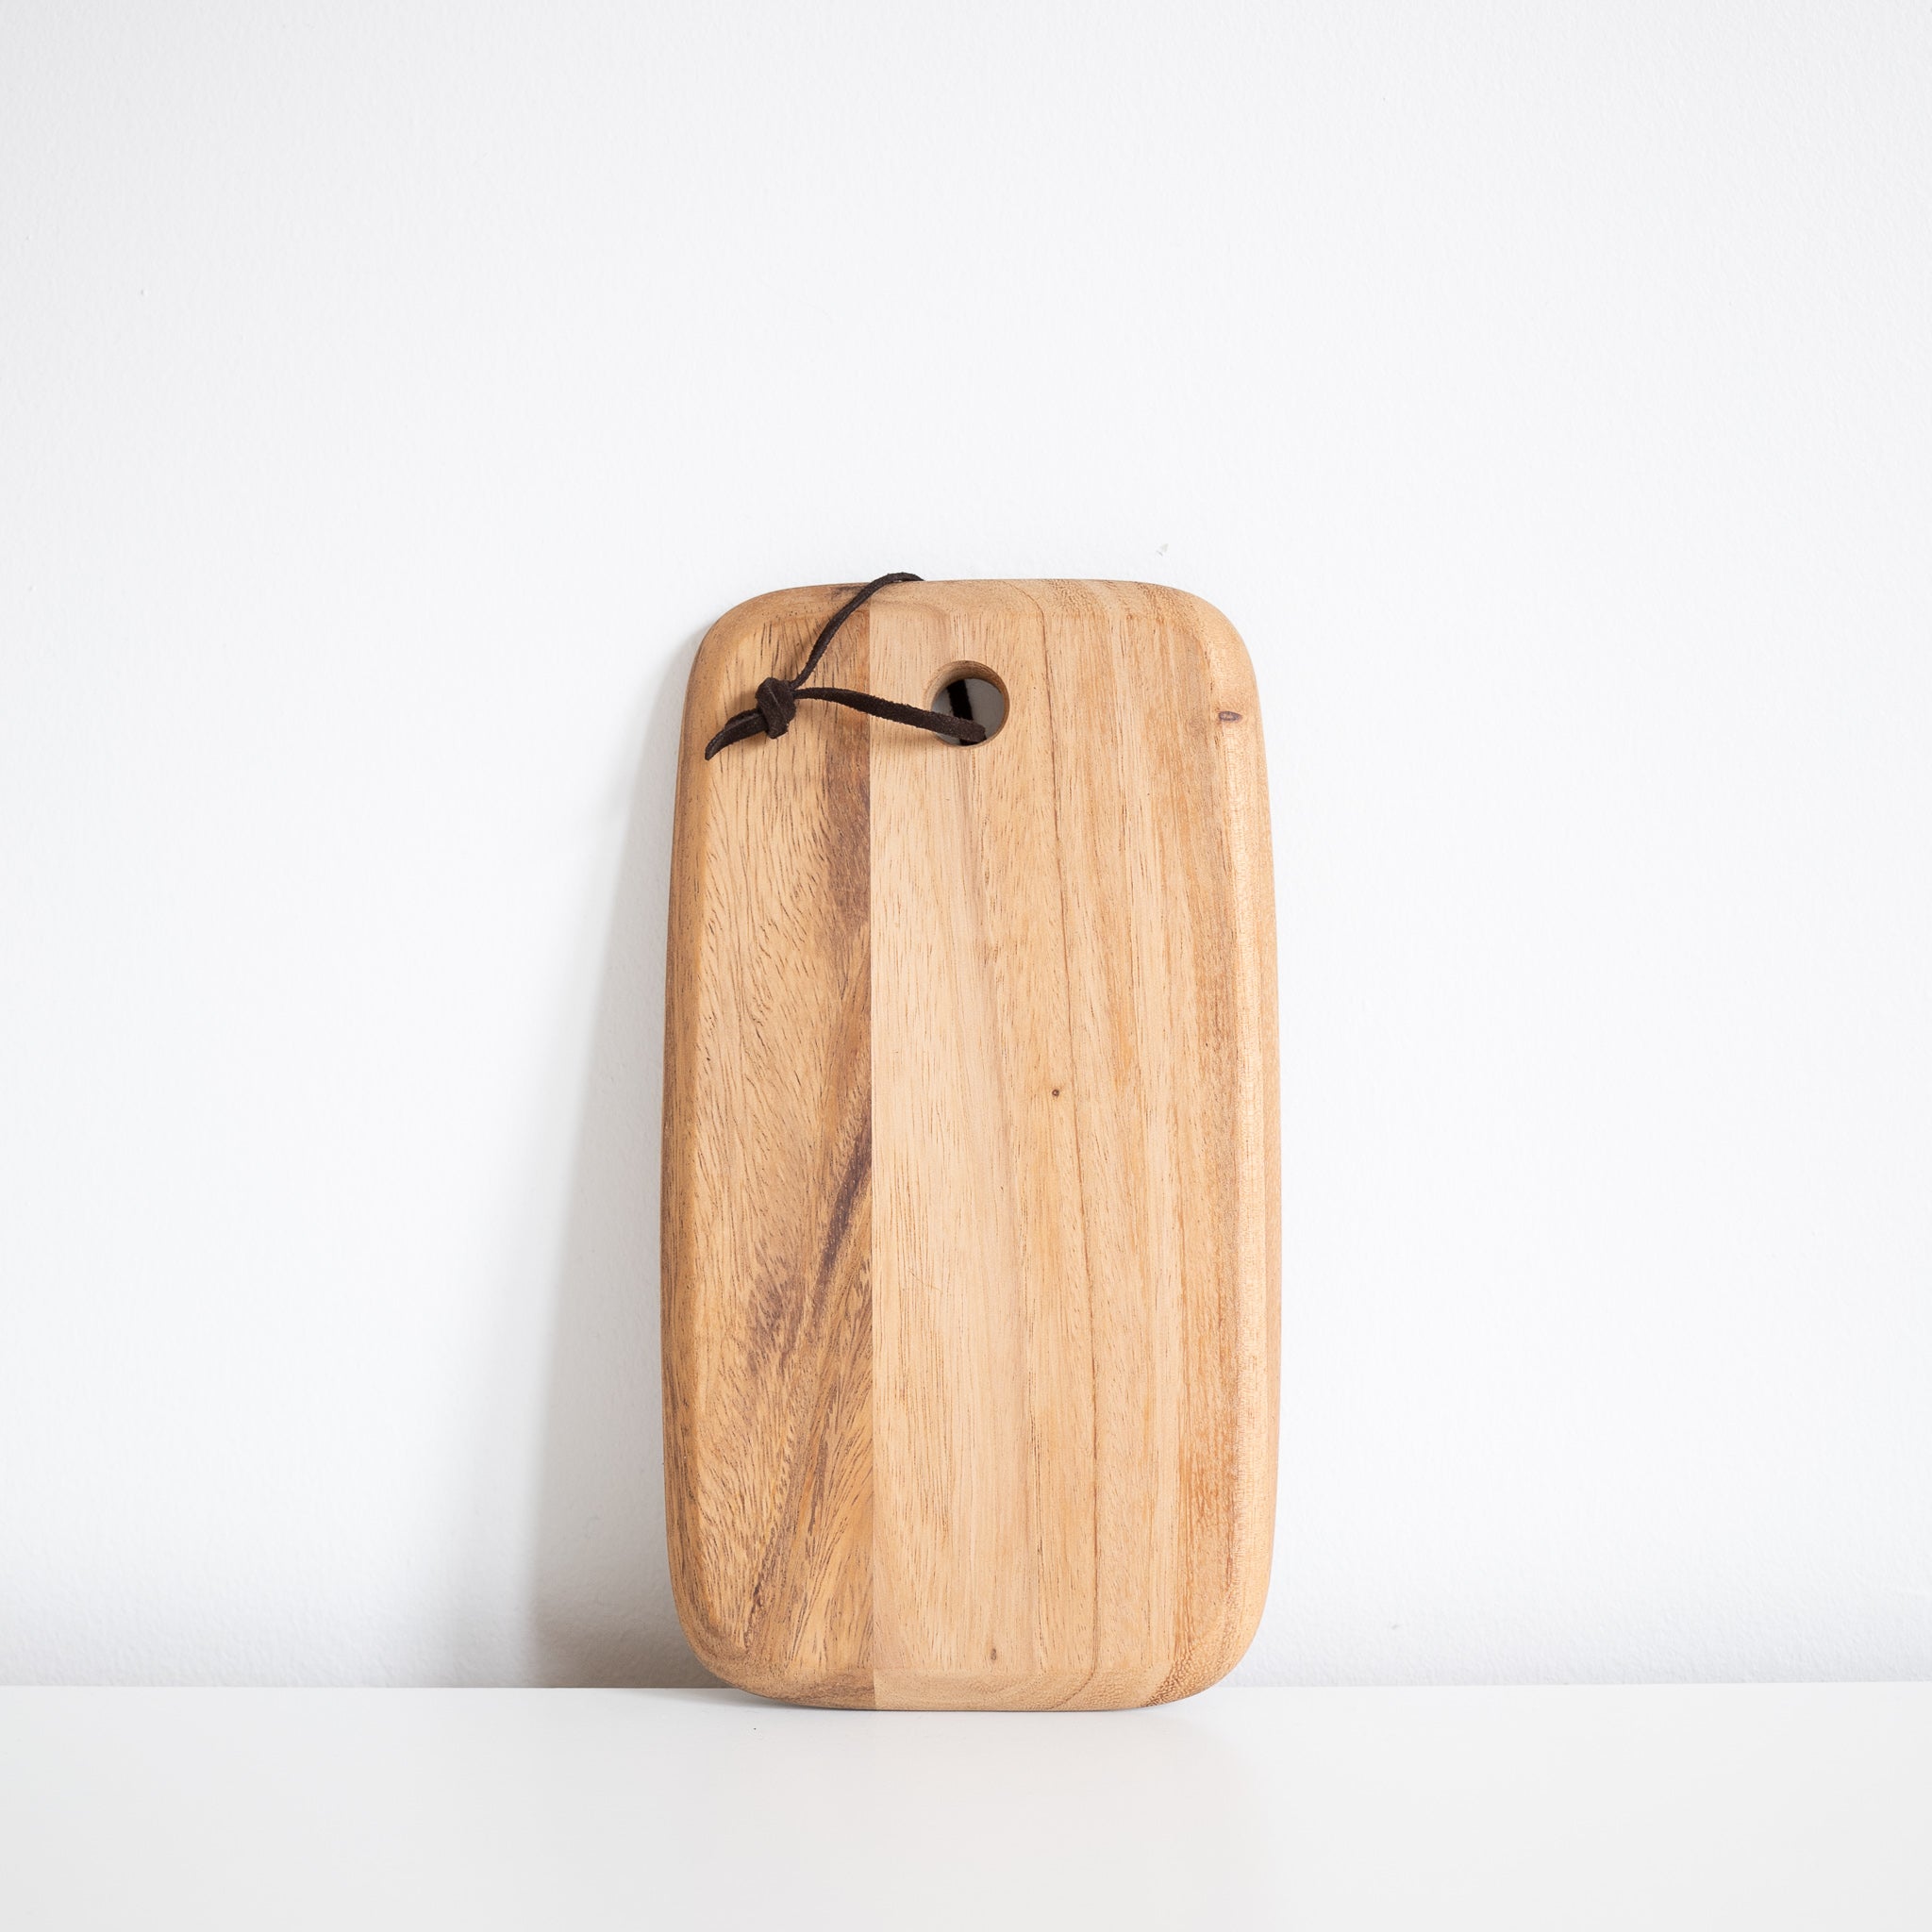 small rectangular acacia wood cheese board with leather strap